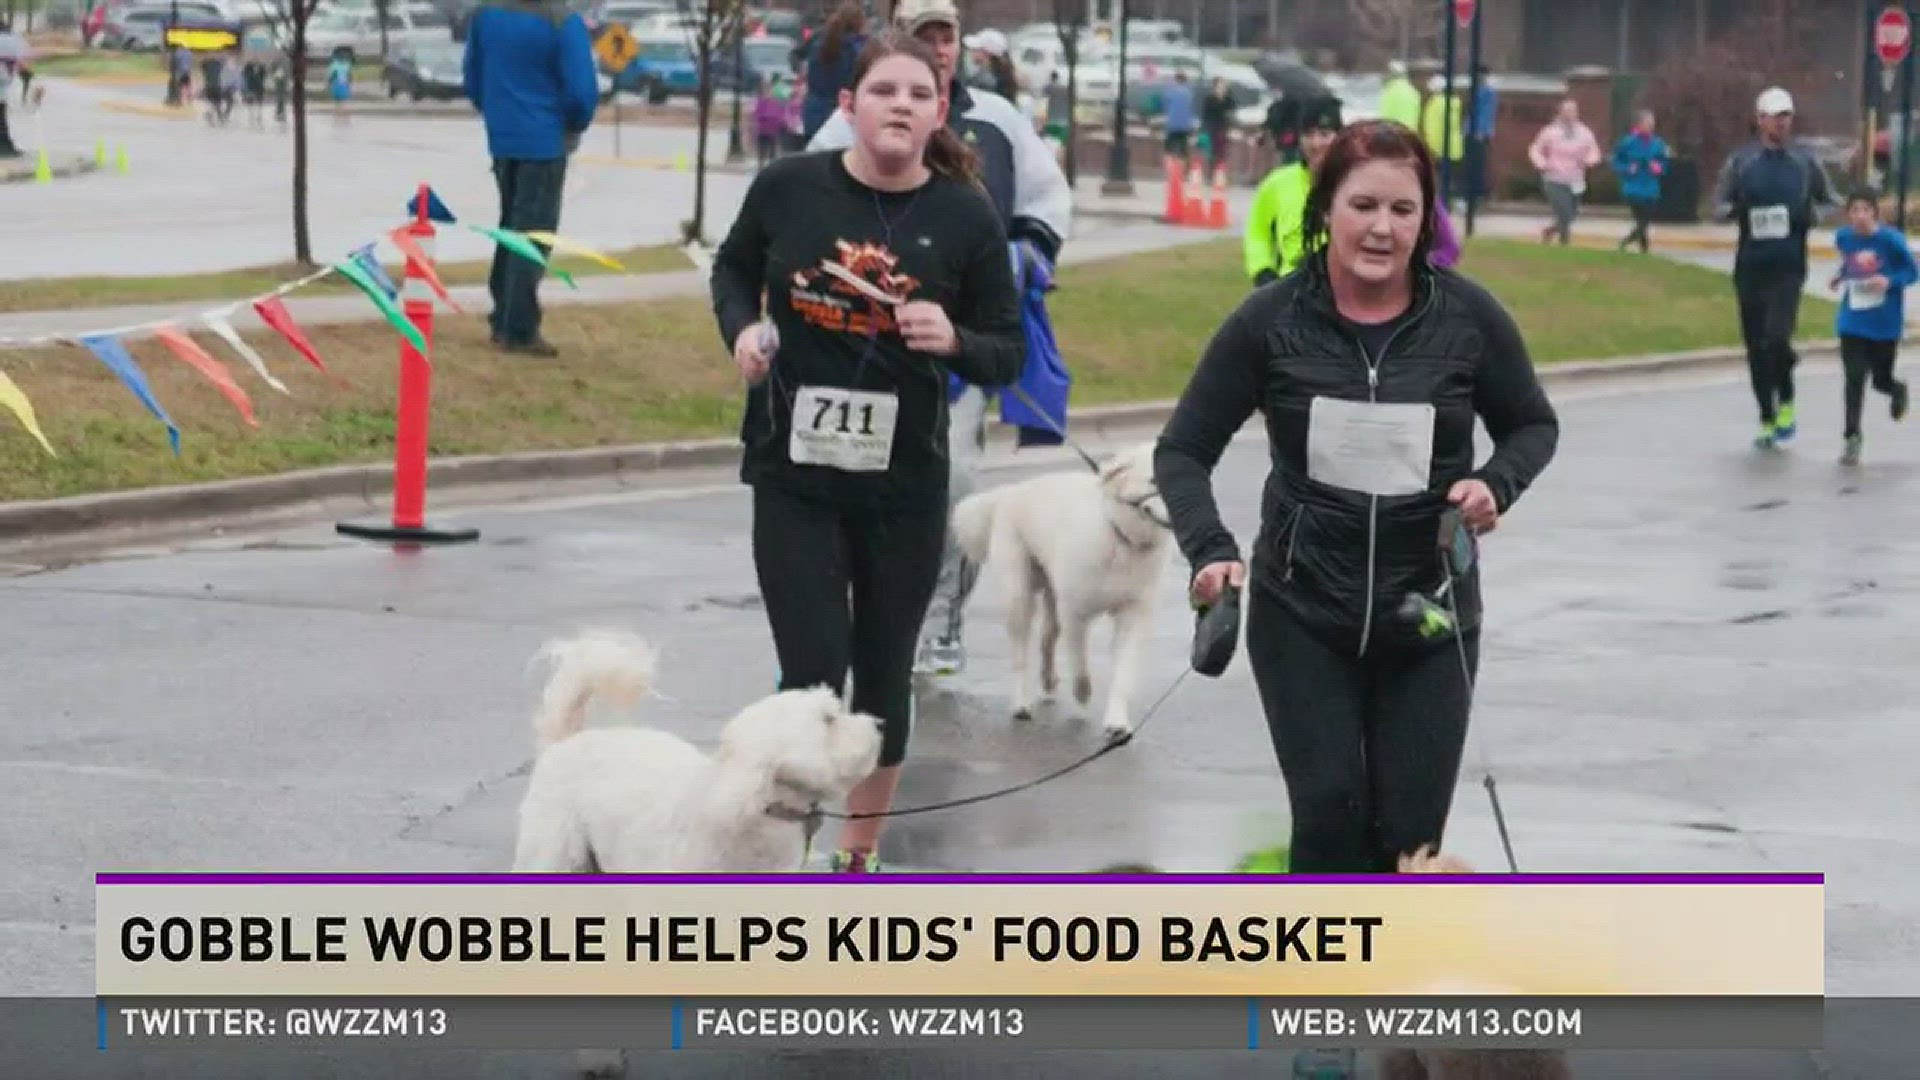 Our Lauren Stanton talked with representatives from the Gobble Wobble about how you can burn some of those Thanksgiving calories and help local kids at the same time.